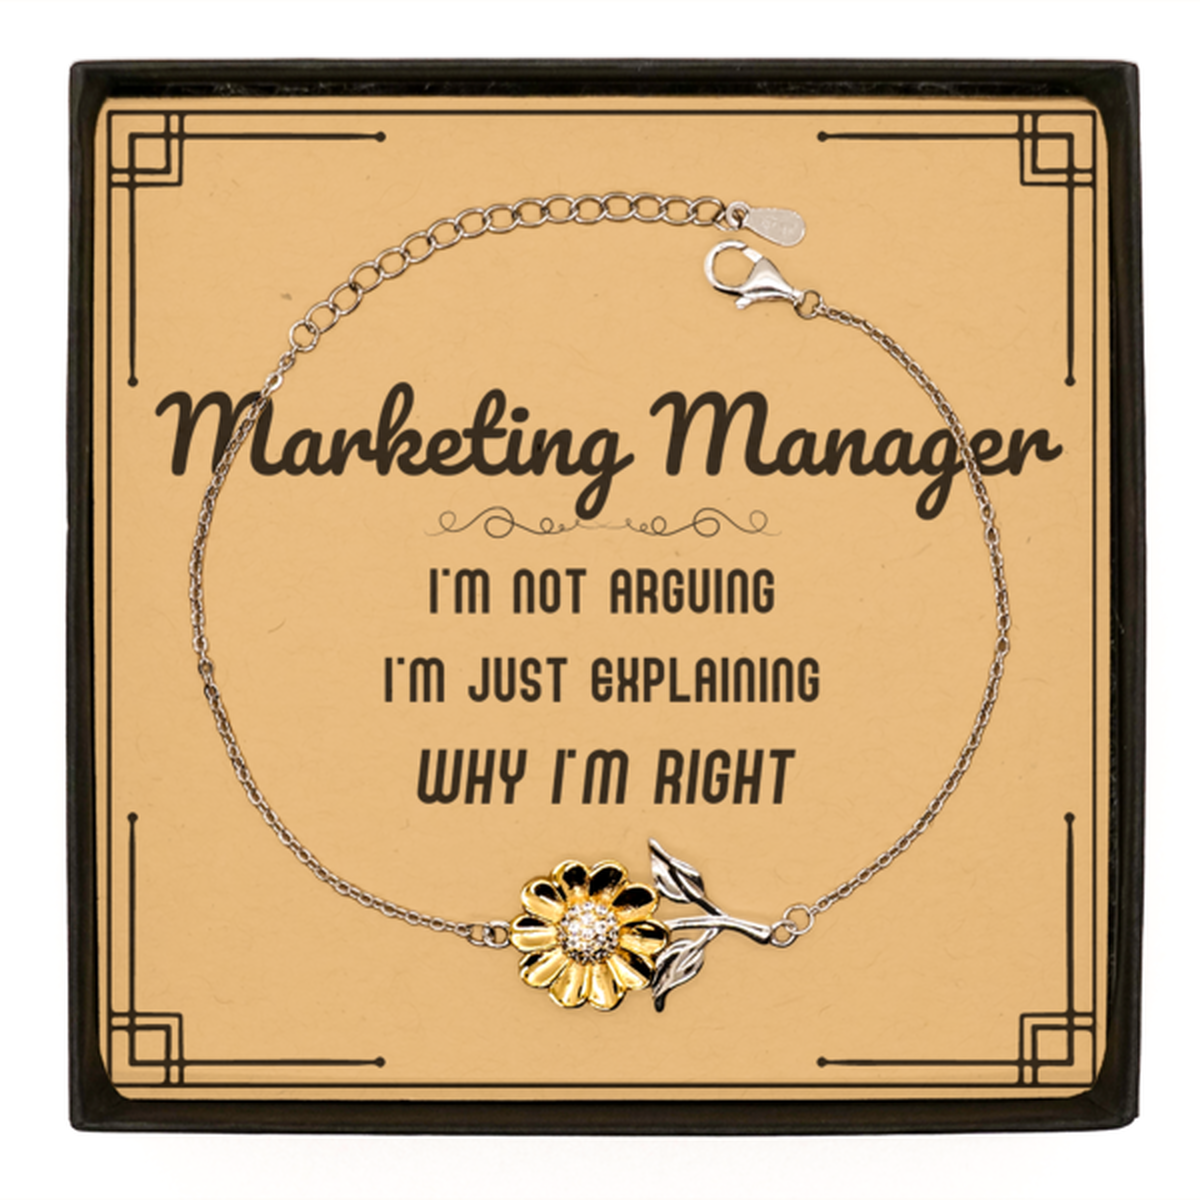 Marketing Manager I'm not Arguing. I'm Just Explaining Why I'm RIGHT Sunflower Bracelet, Funny Saying Quote Marketing Manager Gifts For Marketing Manager Message Card Graduation Birthday Christmas Gifts for Men Women Coworker